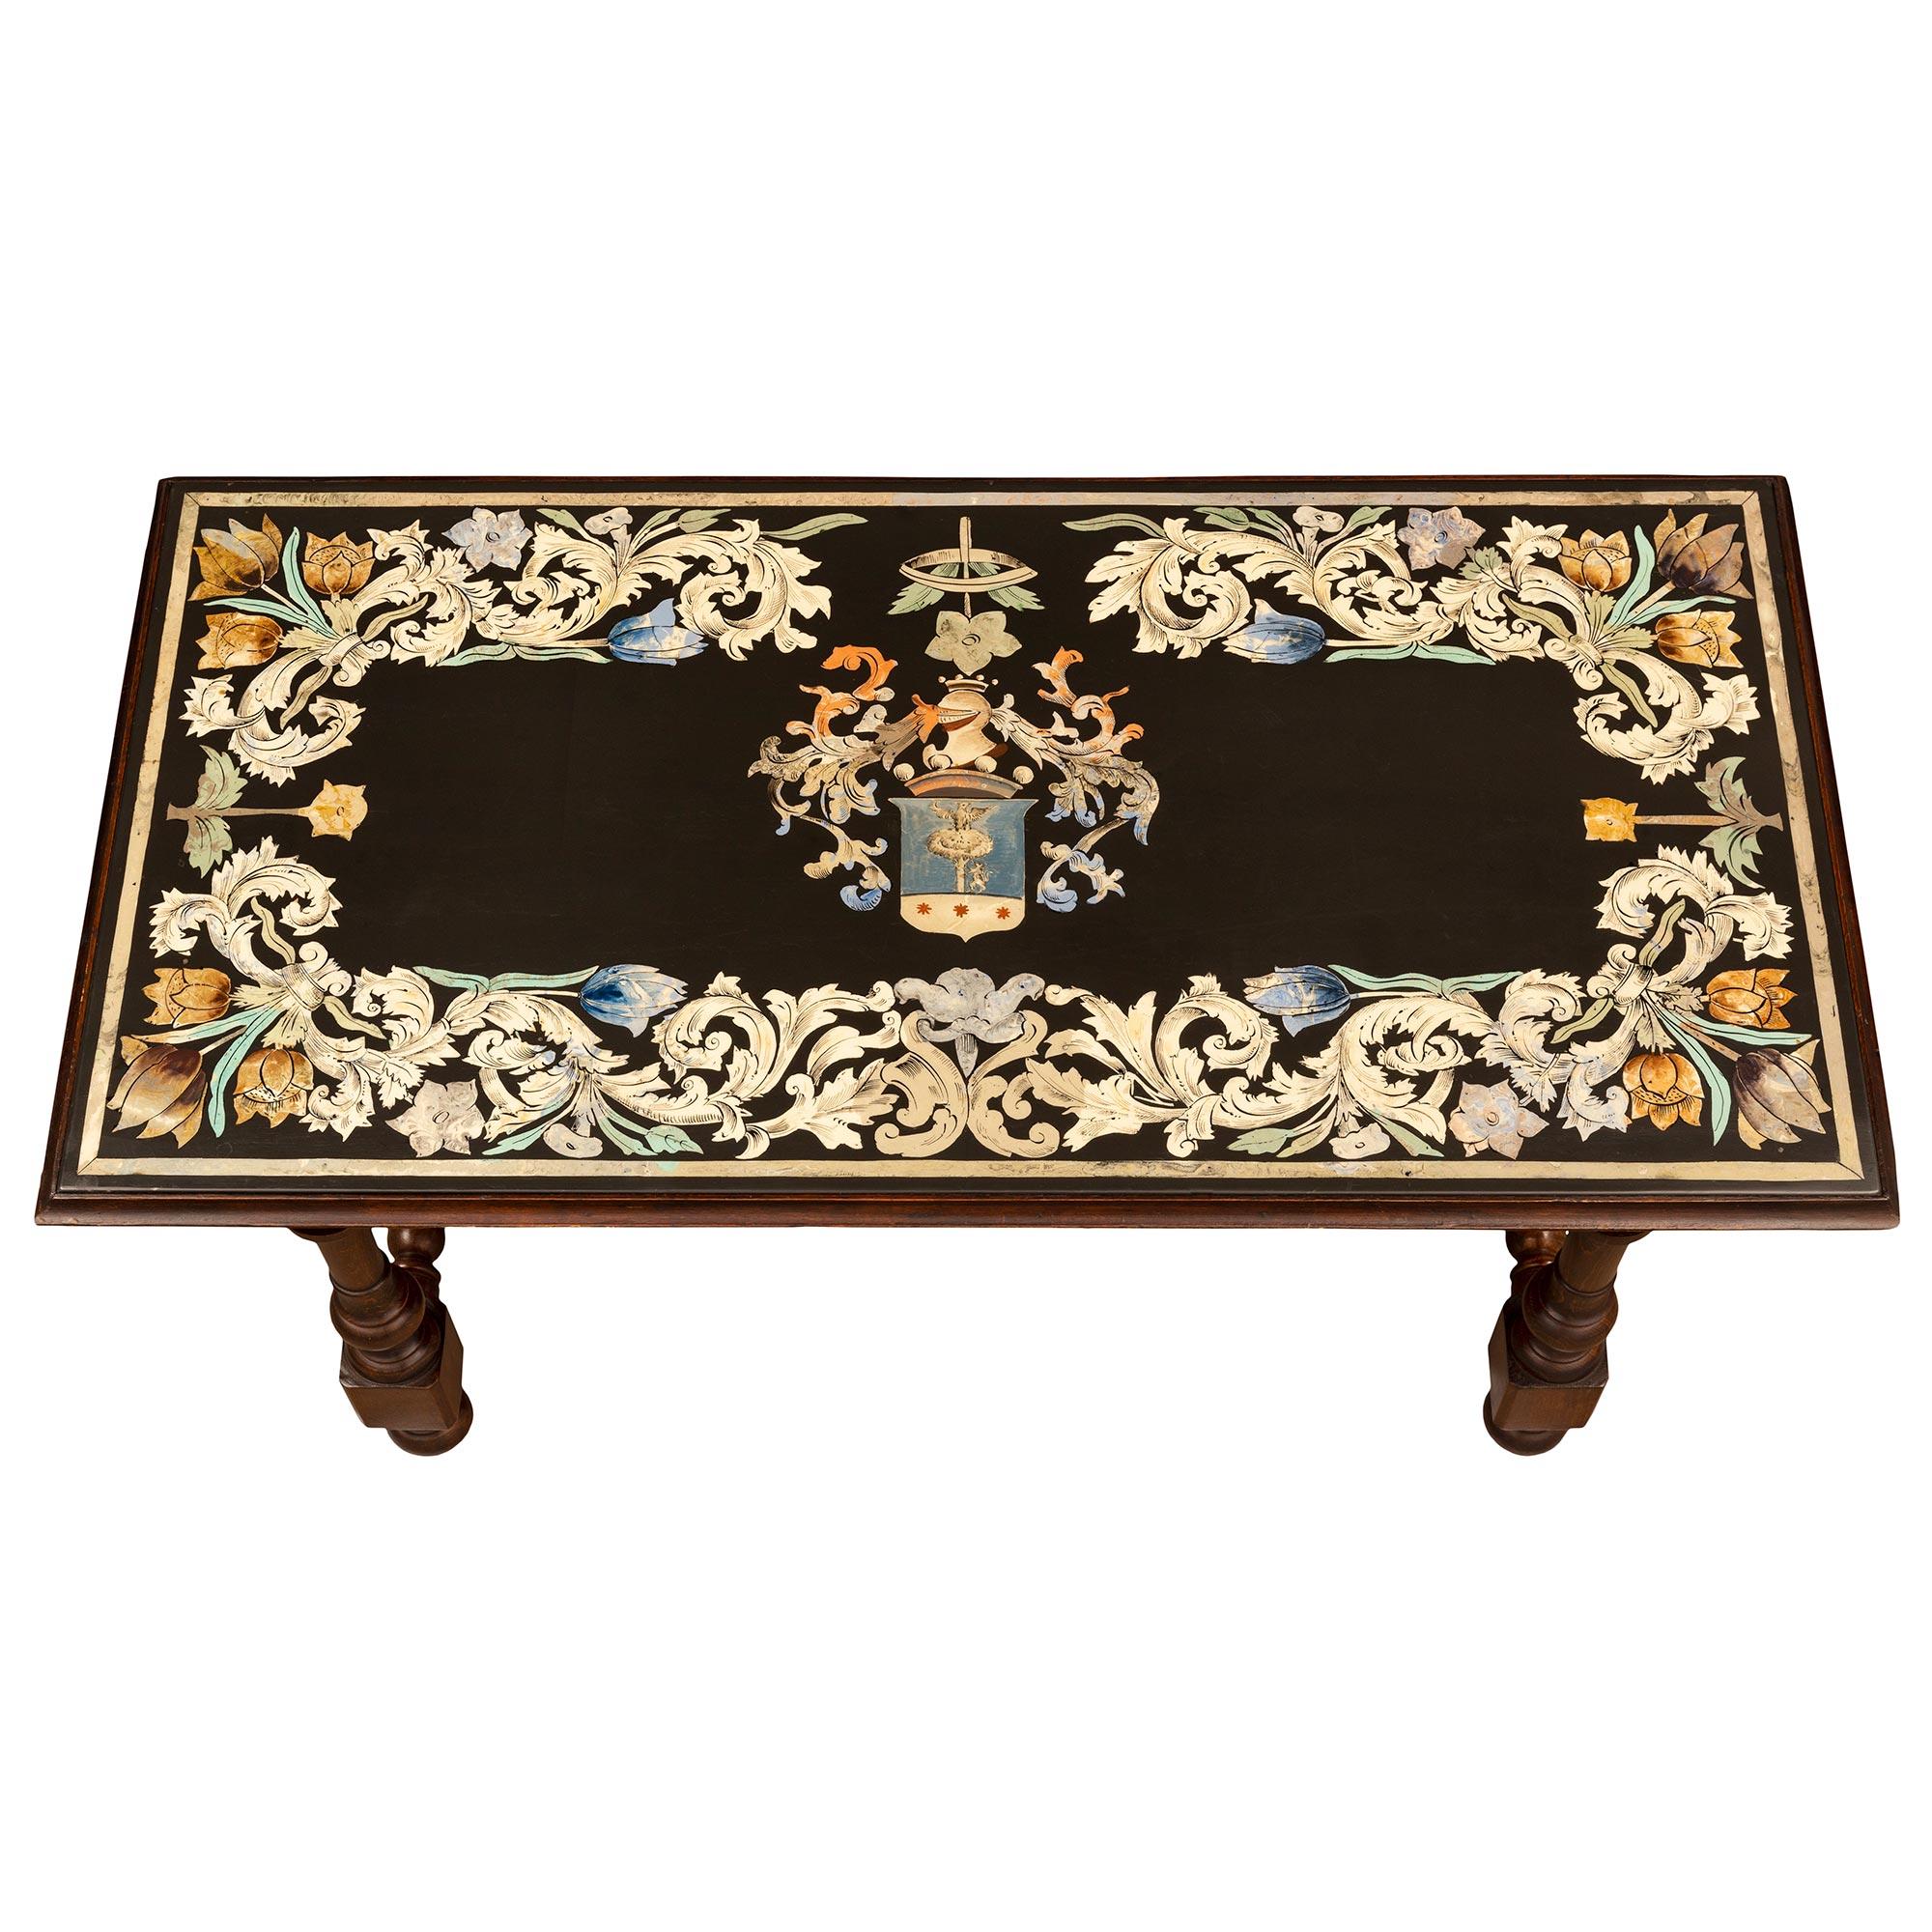 A handsome and extremely decorative Italian 19th century Louis XIV st. Walnut and Scagliola coffee table. The rectangular table is raised by four elegant turned legs with lovely mottled designs and block reserves connected by a turned H shaped